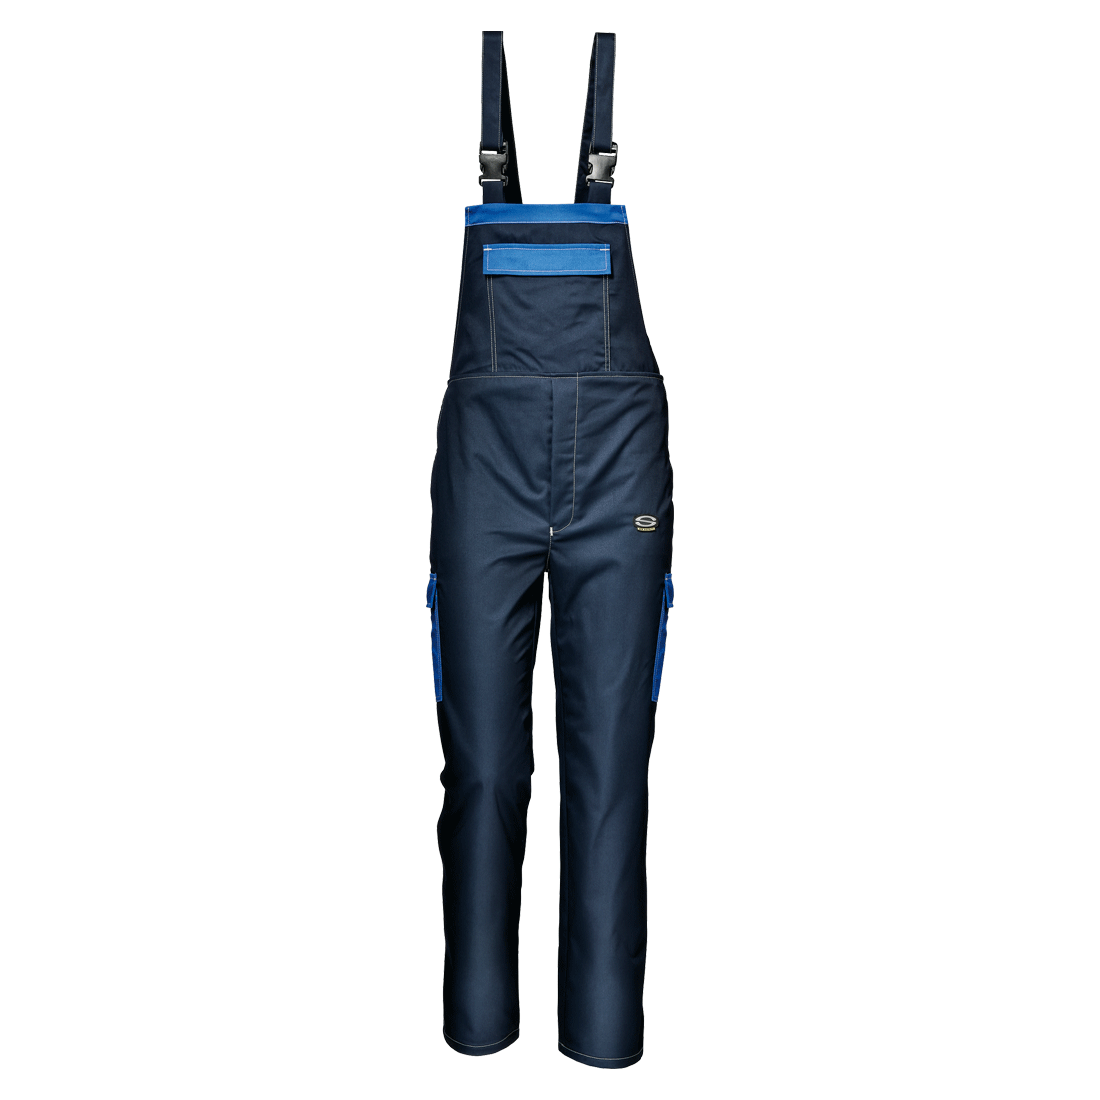 | Sir Work Safety coveralls & pants bib System